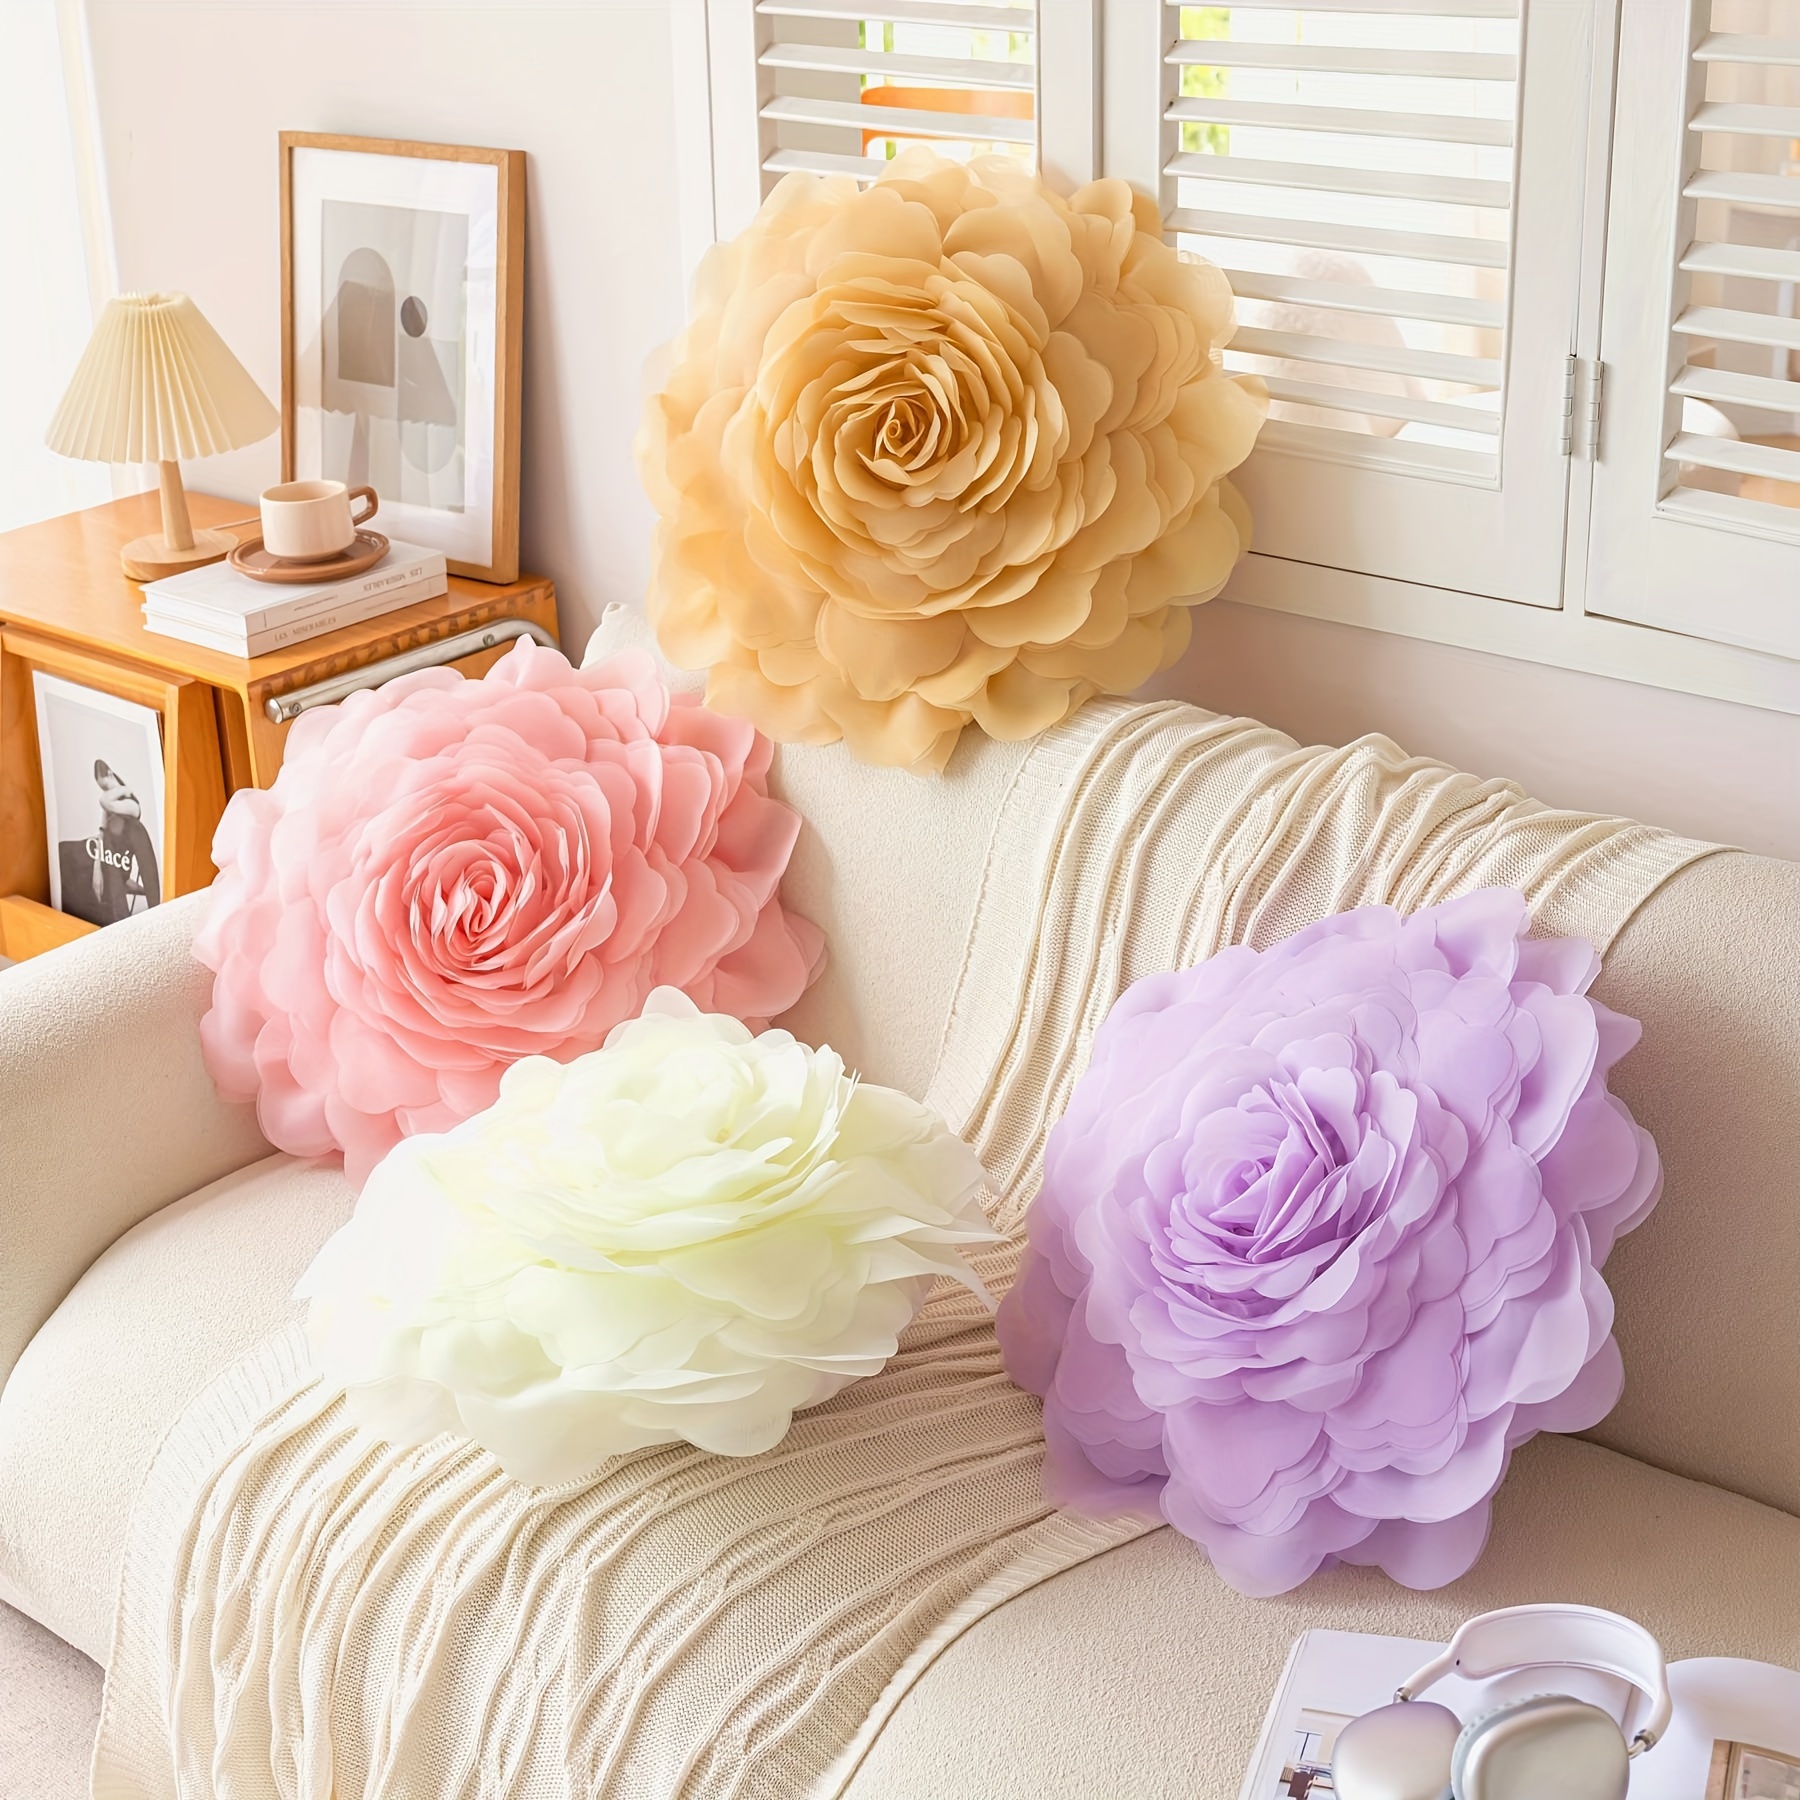 

Colorful Flower Pillow Case Handmade Pillowcase Simulation Flower Throw Pillow Pretty Home Decoration Suitable For Beds And Sofas (just Pillowcase, No Pillow)